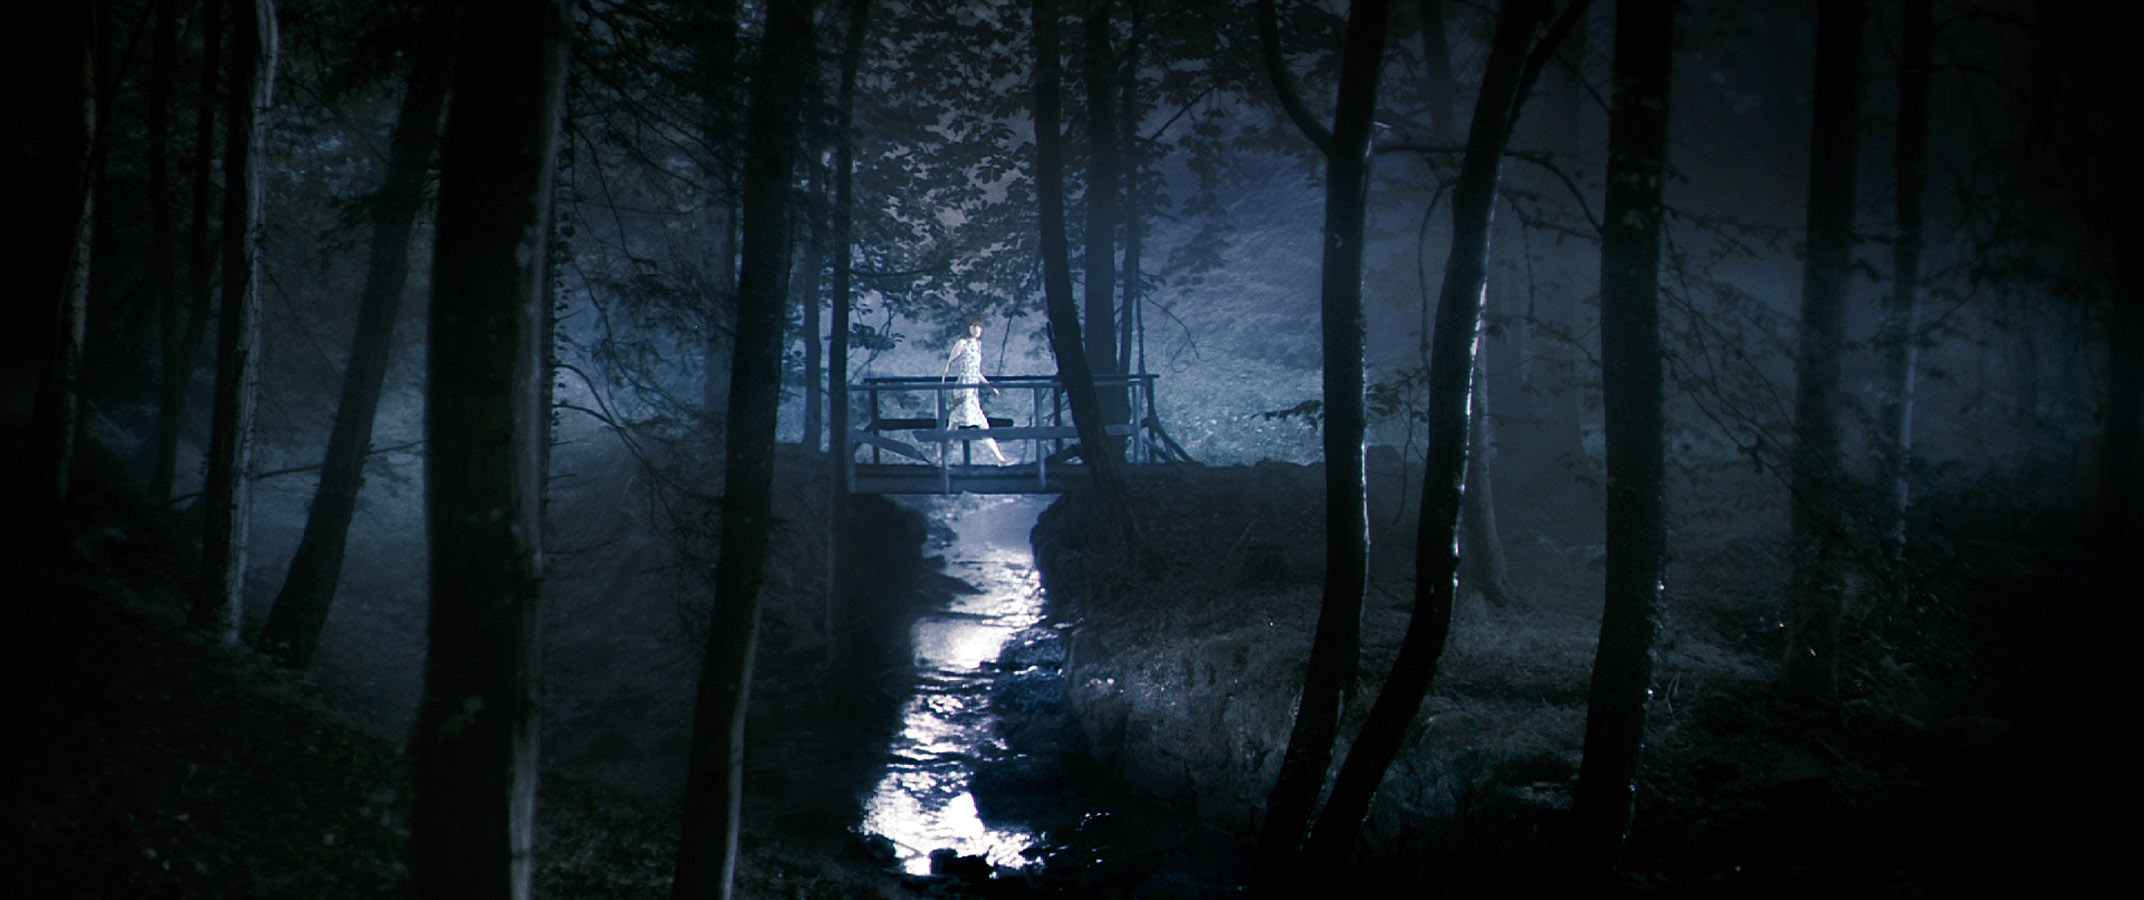 A woman crosses a bridge in the woods